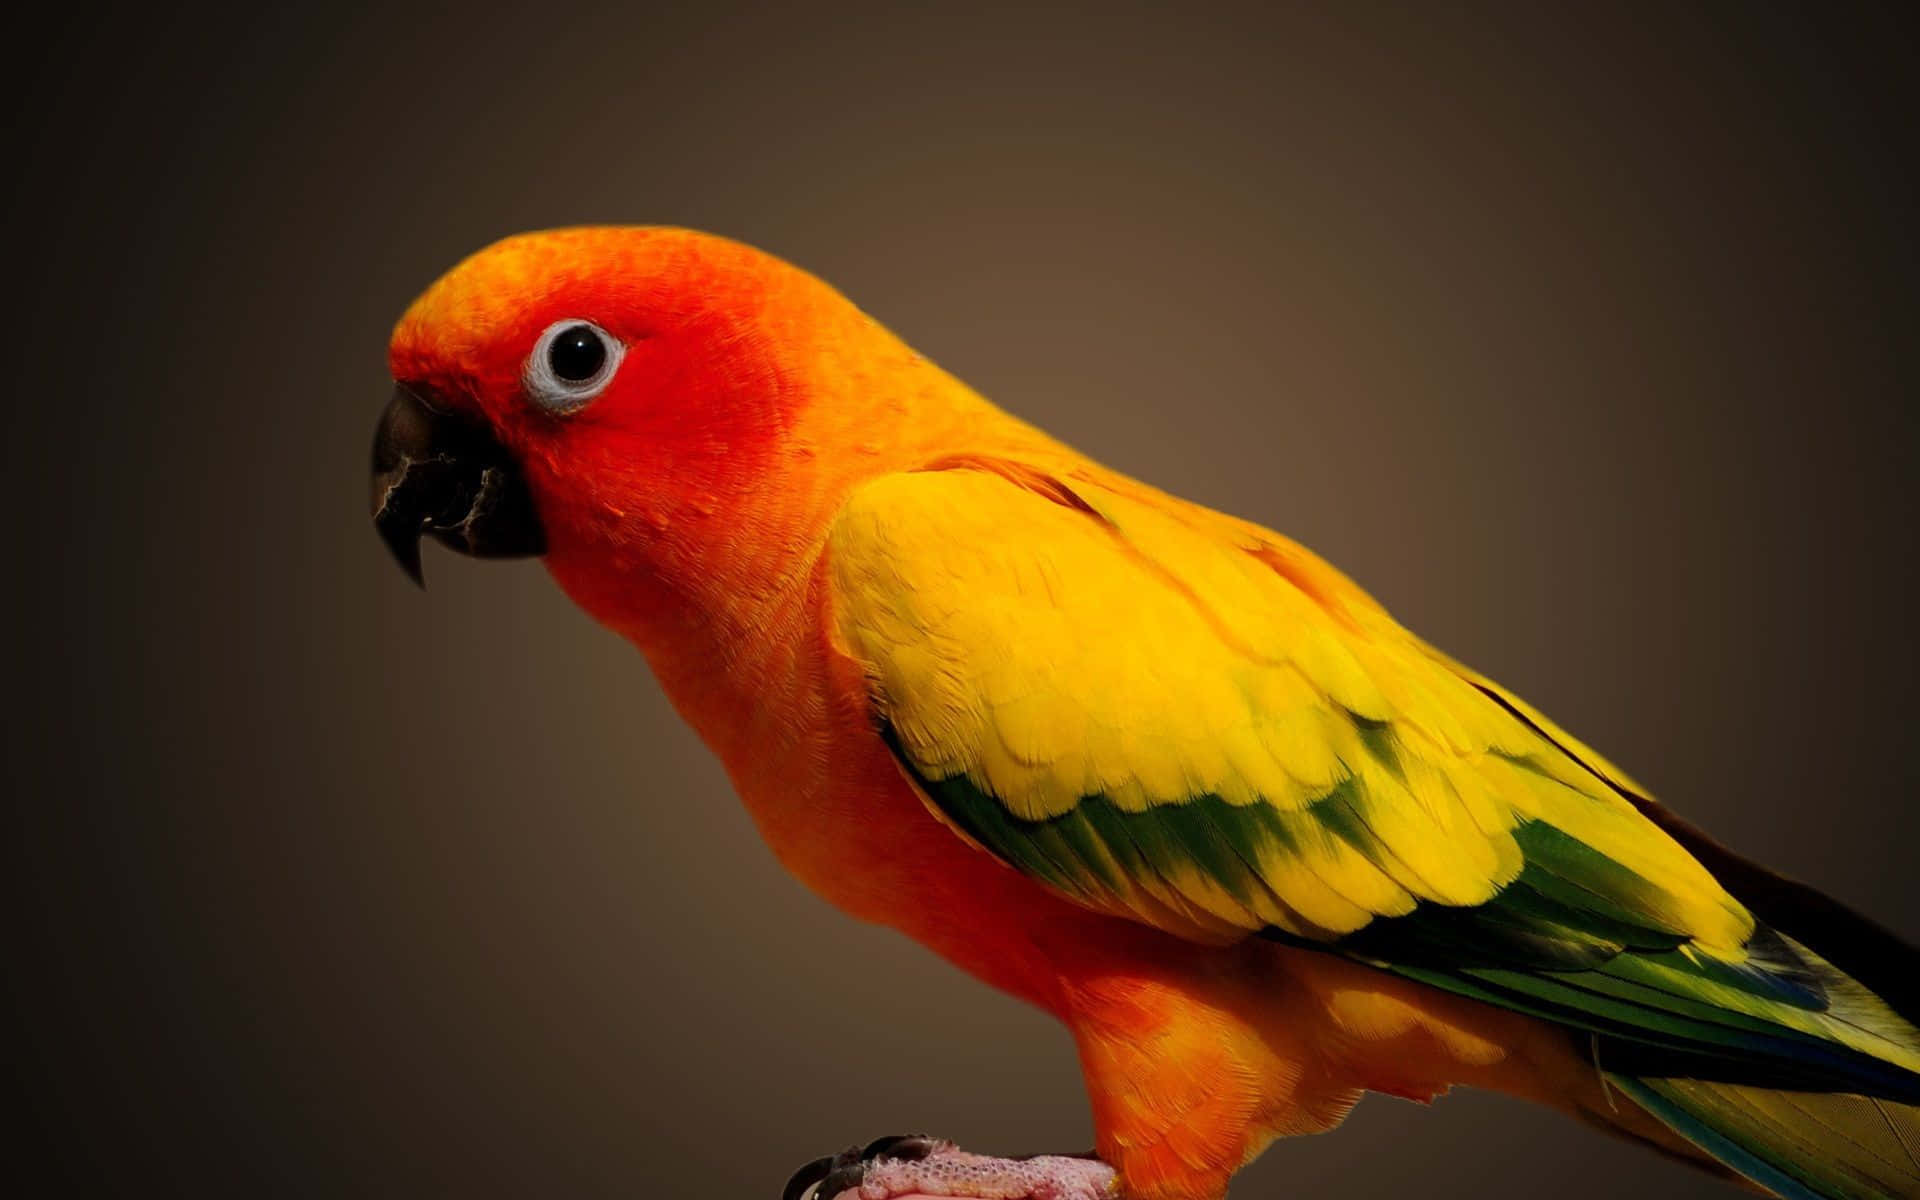 A Bright and Colorful Parrot